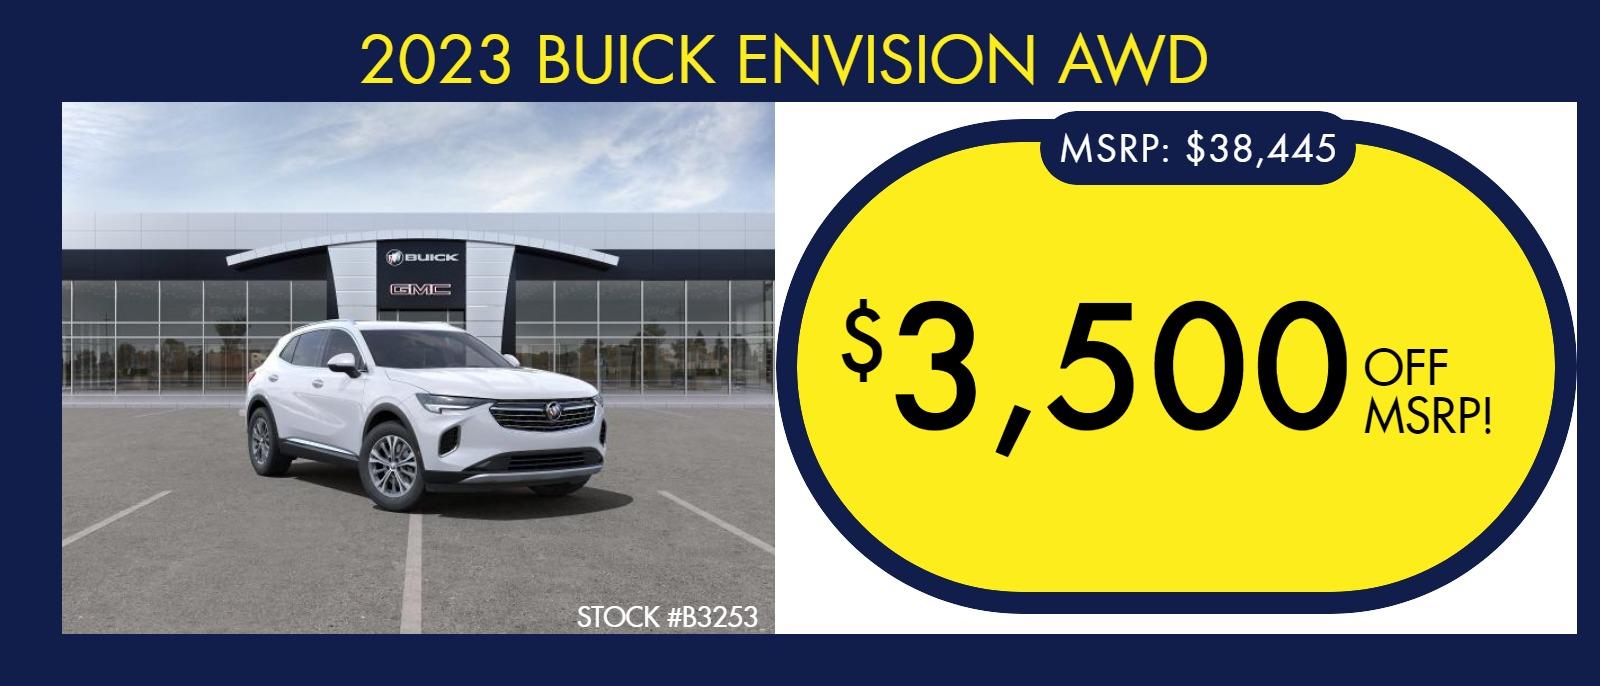 2024 Buick Encore GX
Stock #B3244

MSRP: $40,695
$3,500 OFF MSRP!